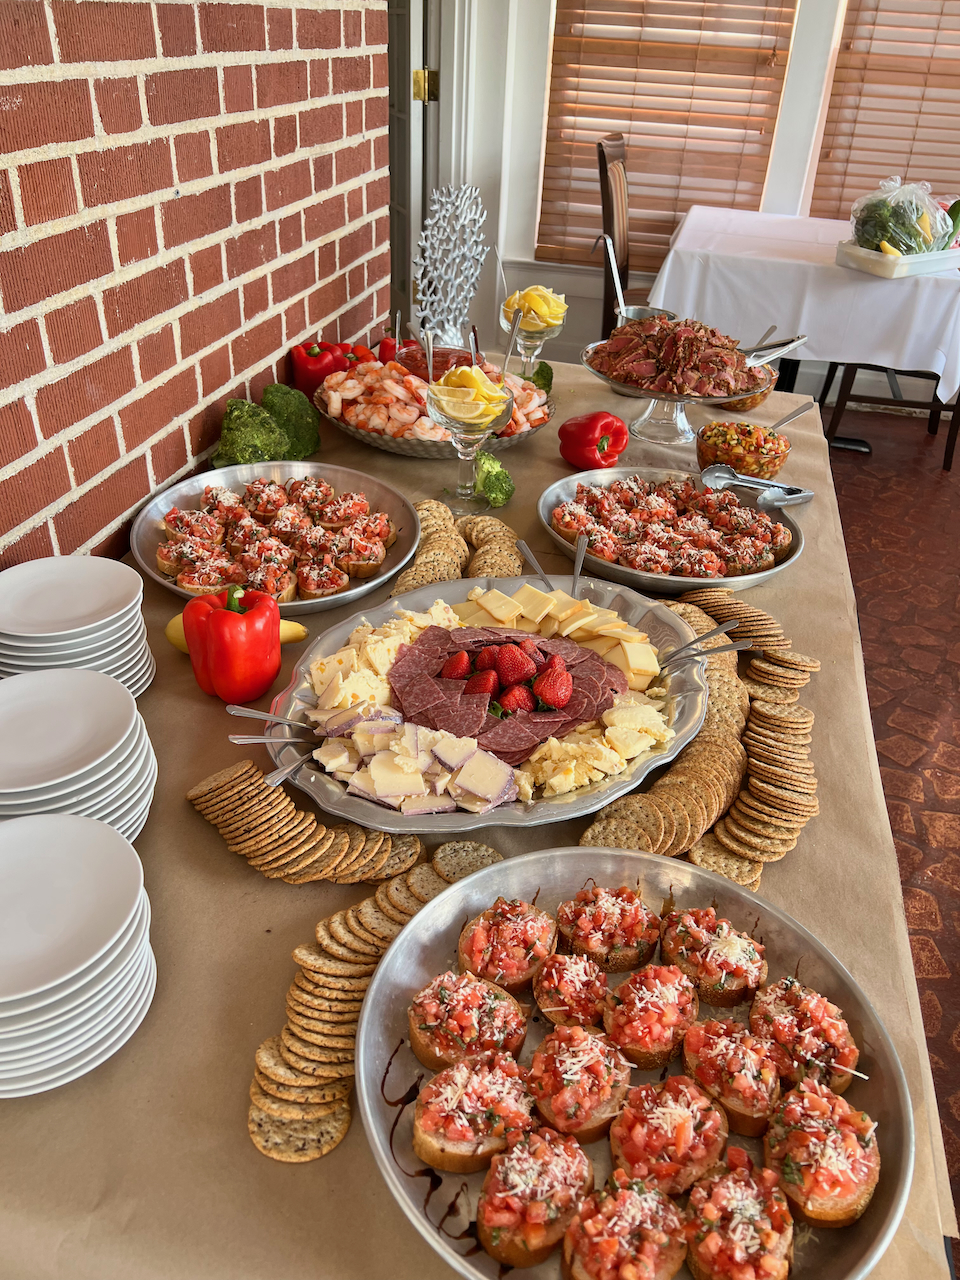 The chef at The Reserve Retreat creates delicious and beautiful food for parties and gatherings